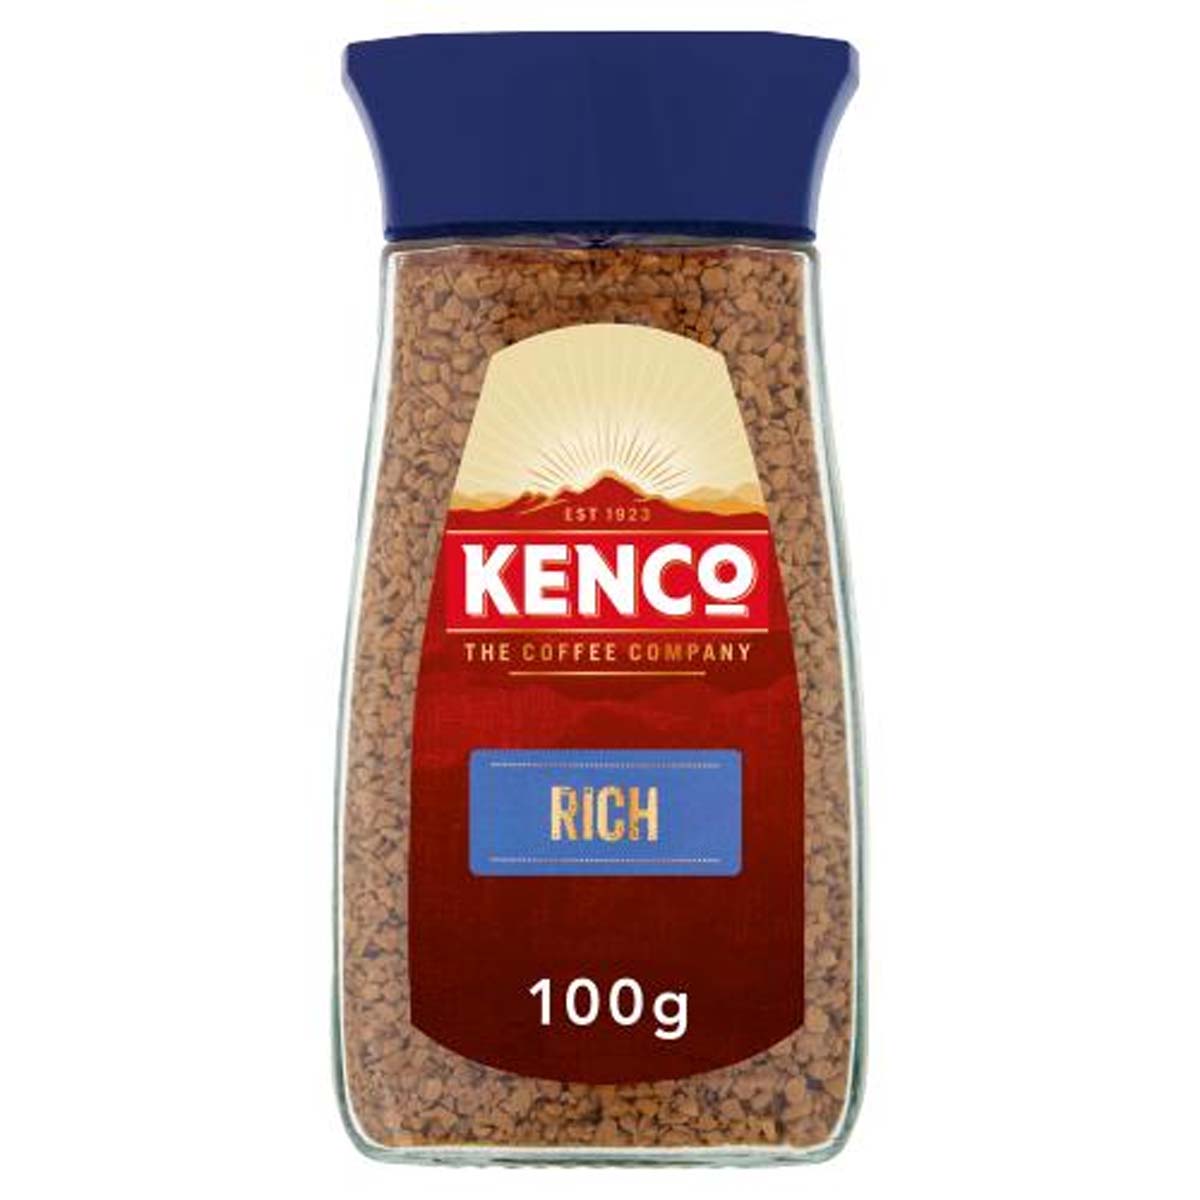 Kenco - Rich Instant Coffee - 100g - Continental Food Store